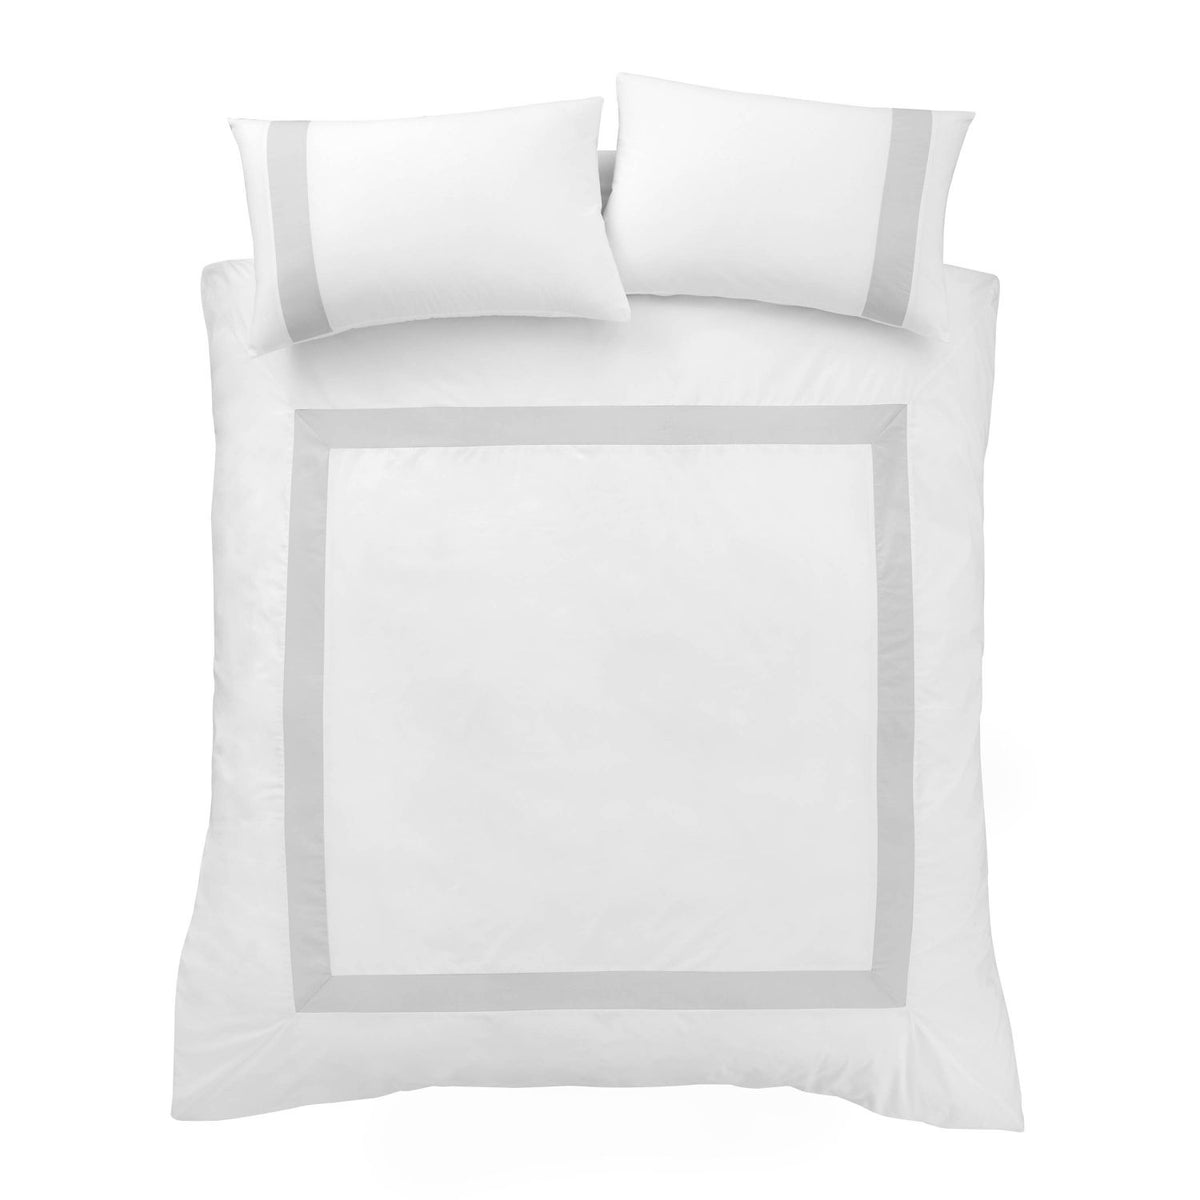 Tailored 180 Thread Count Cotton Duvet Cover Set - White / Silver